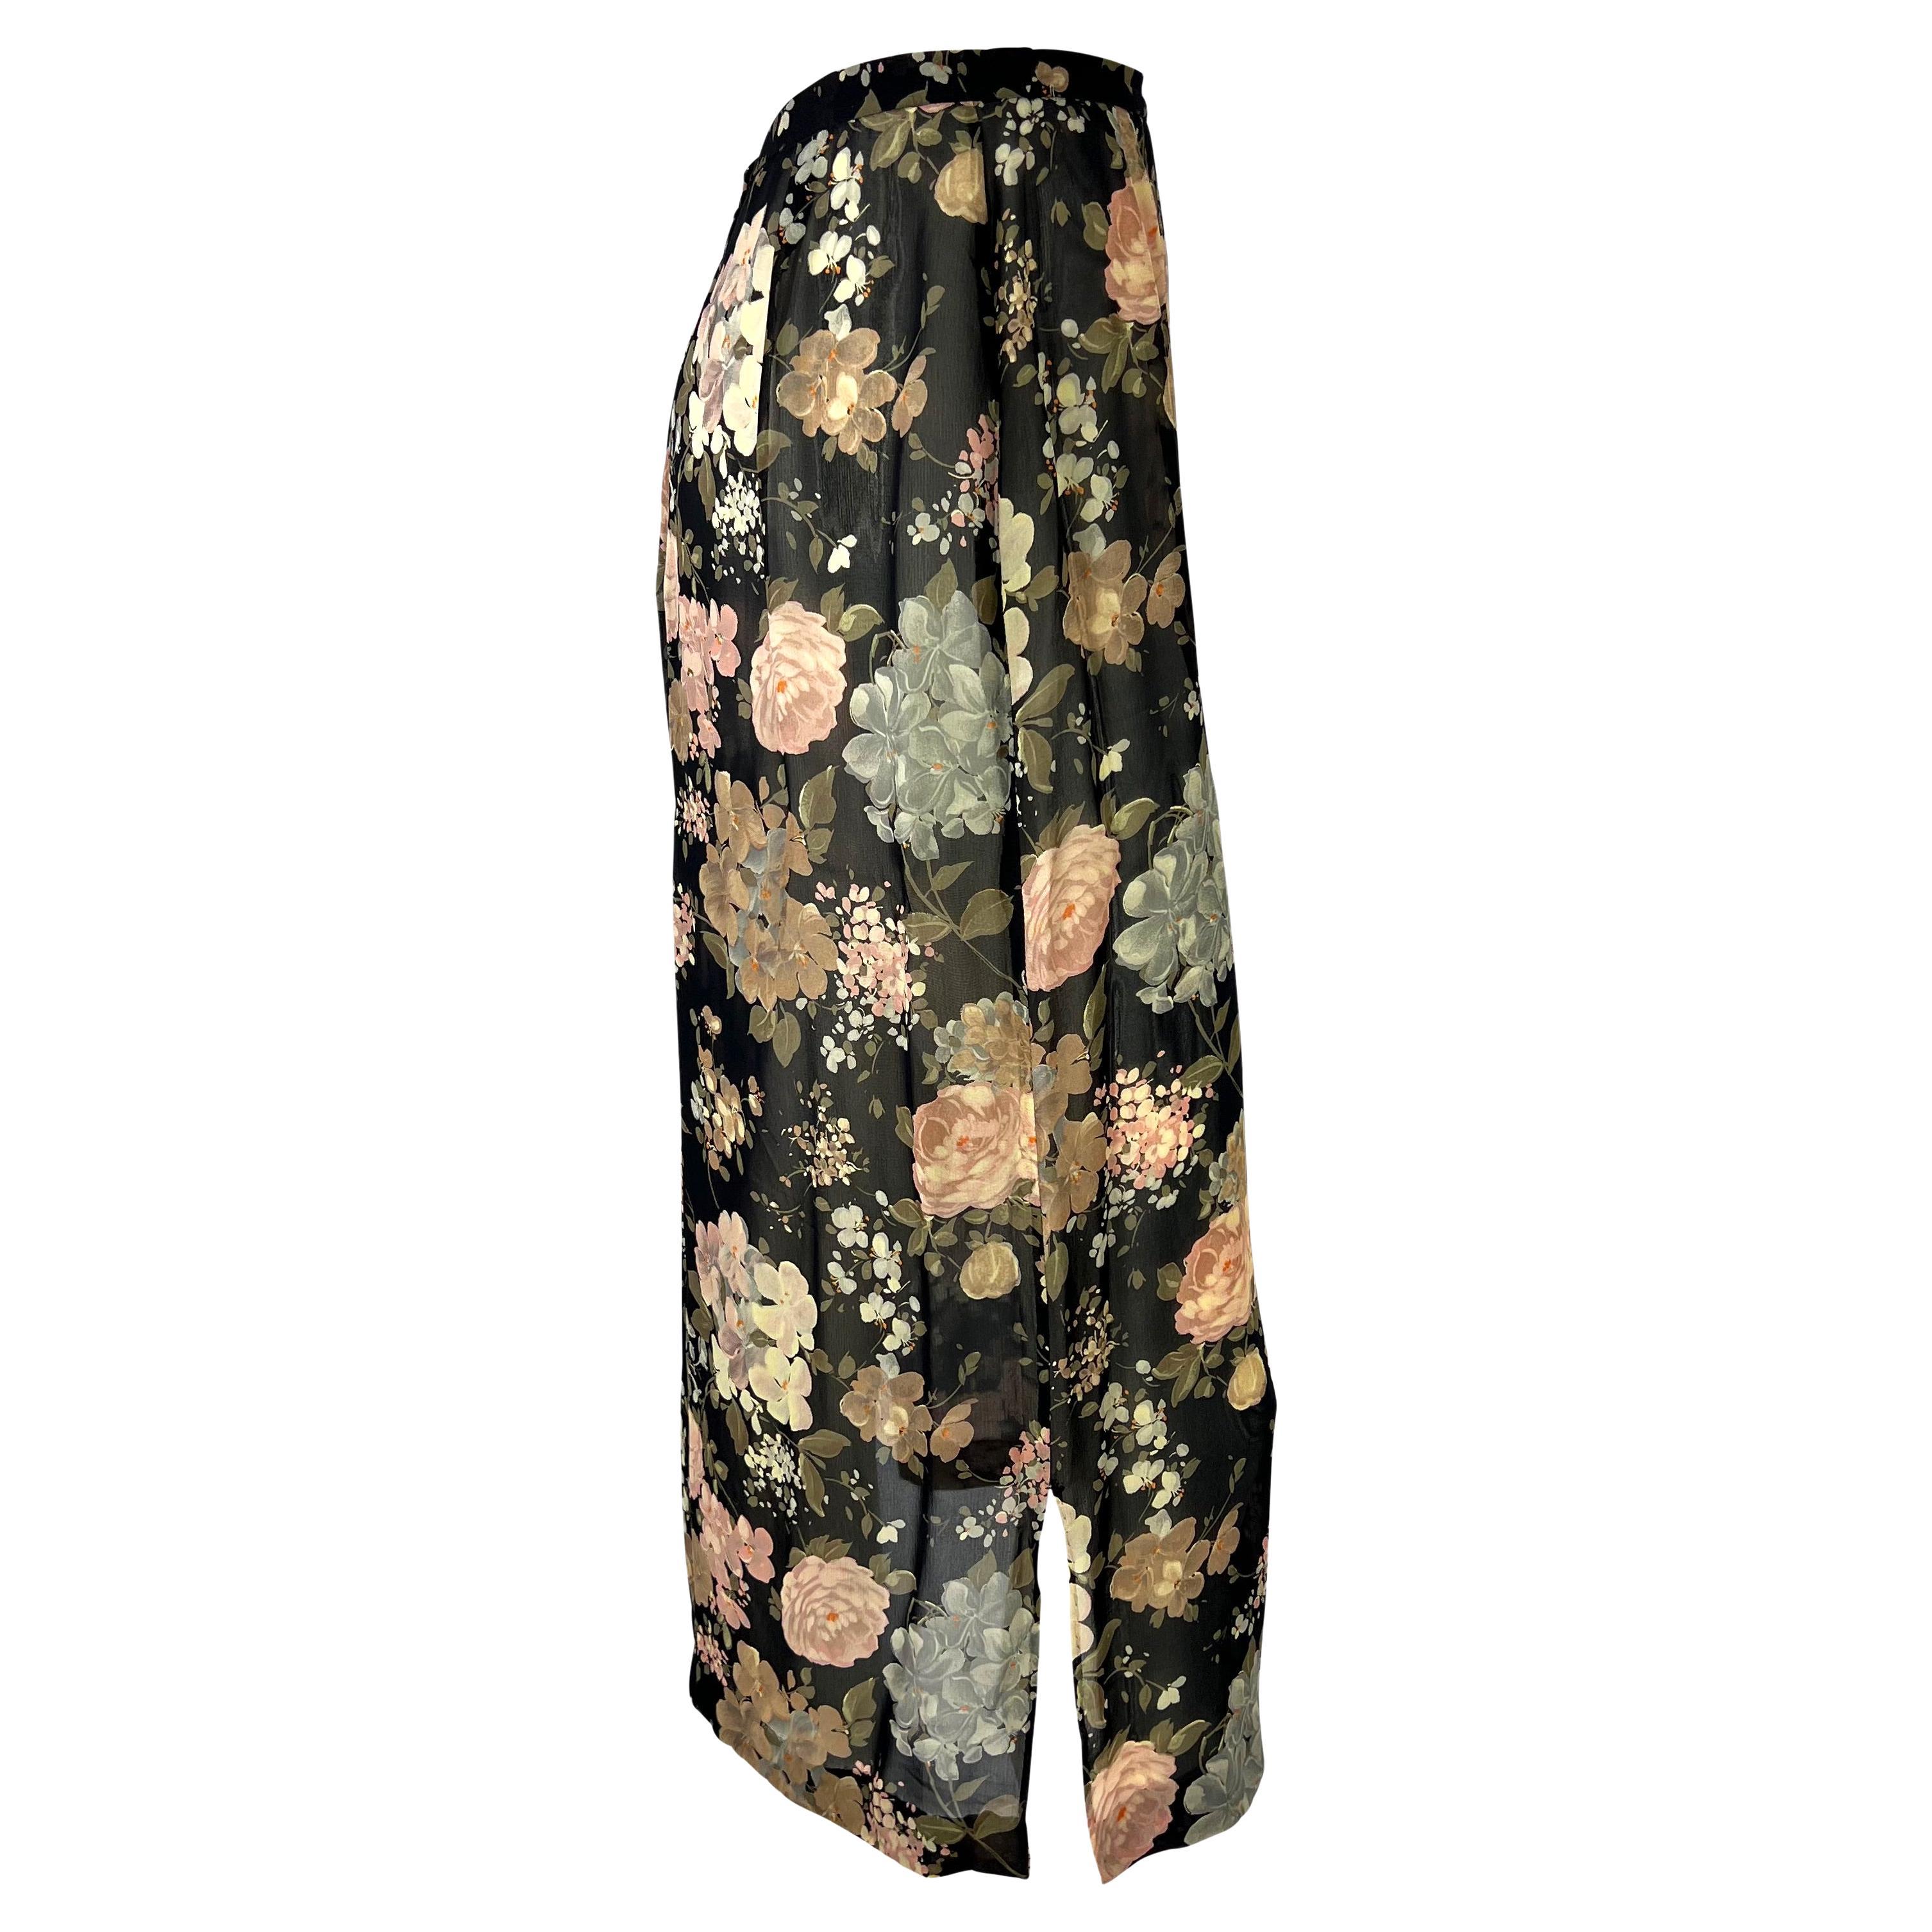 dolce and gabbana floral pencil skirt